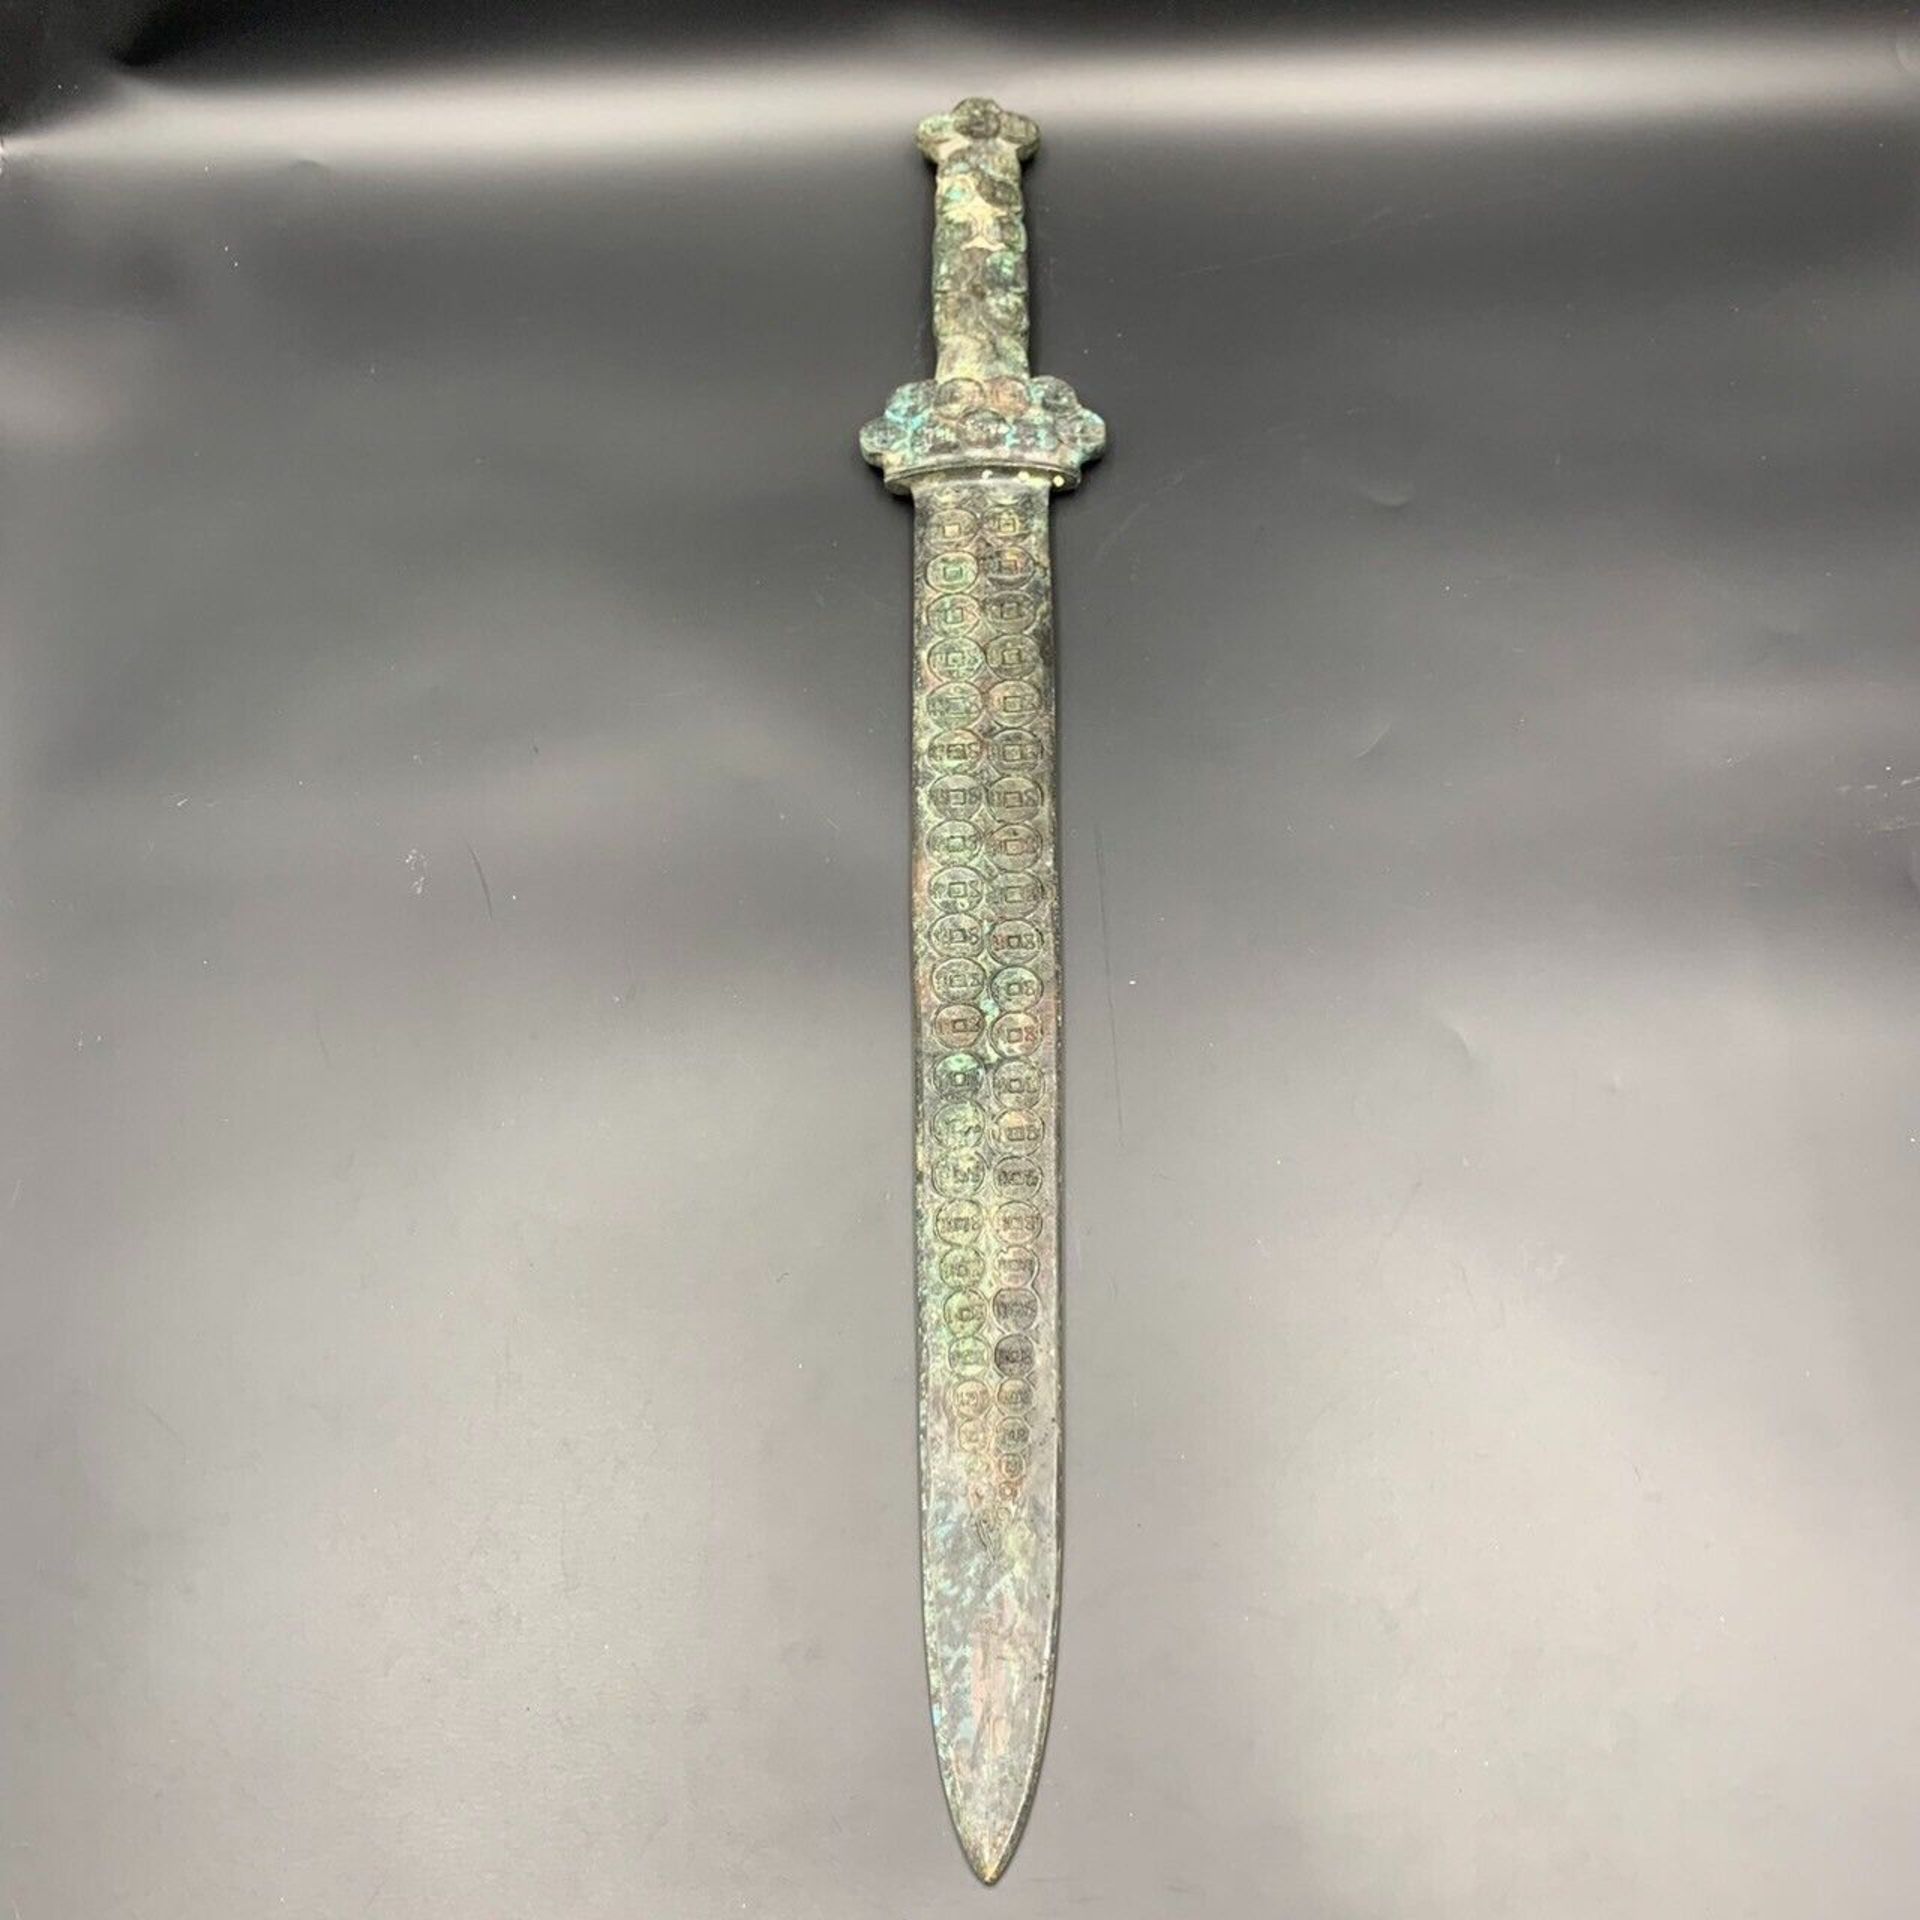 Incredible Rare Handcrafted Art Antique Asian Wonderful Bronze Sword - Image 4 of 9